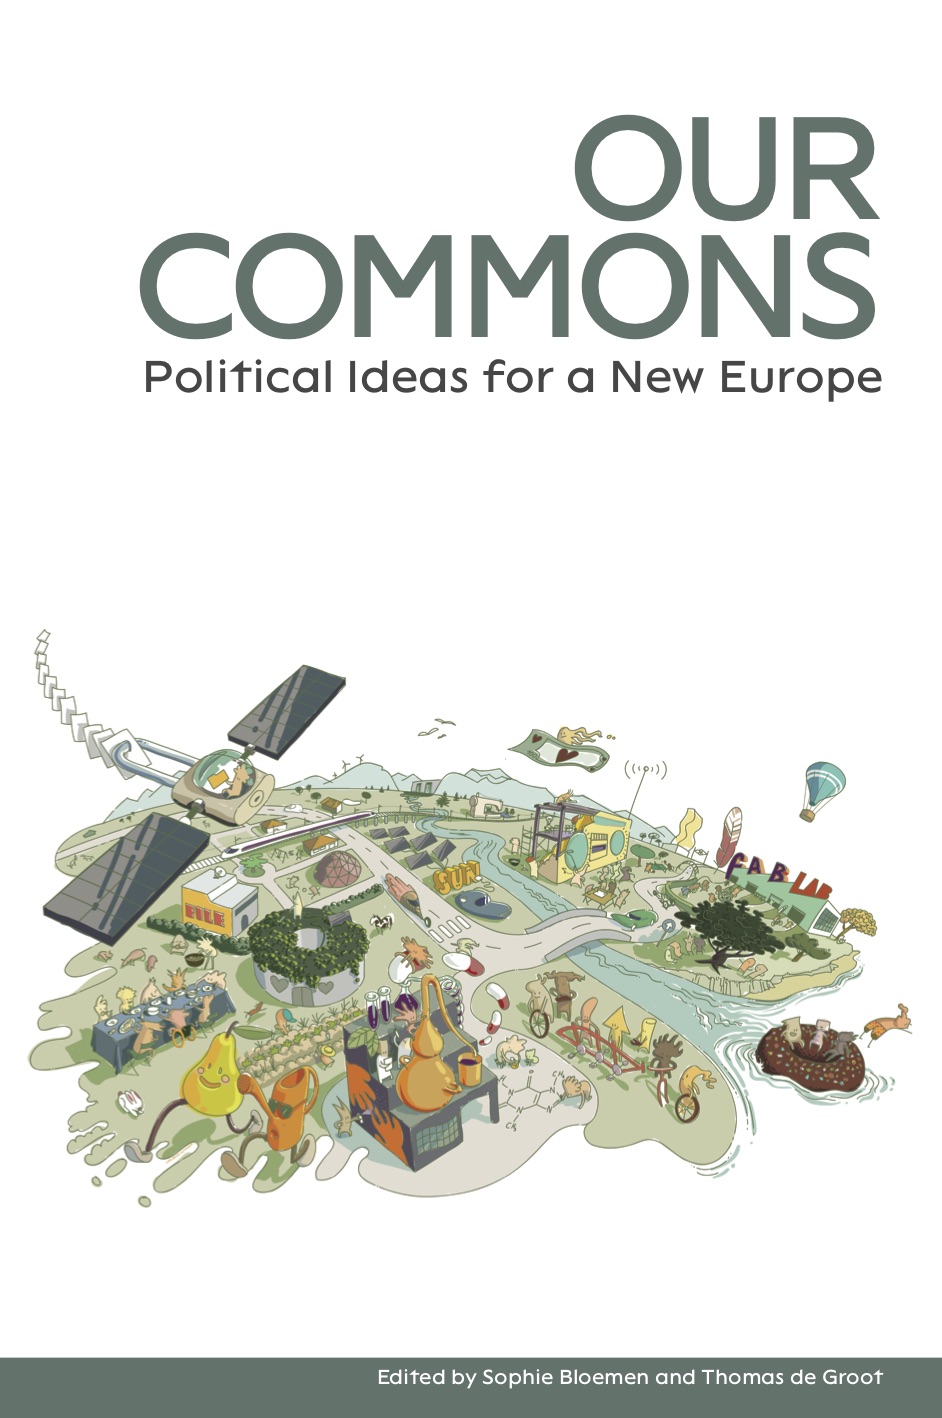 Publication: Our Commons. Political ideas for a New Europe